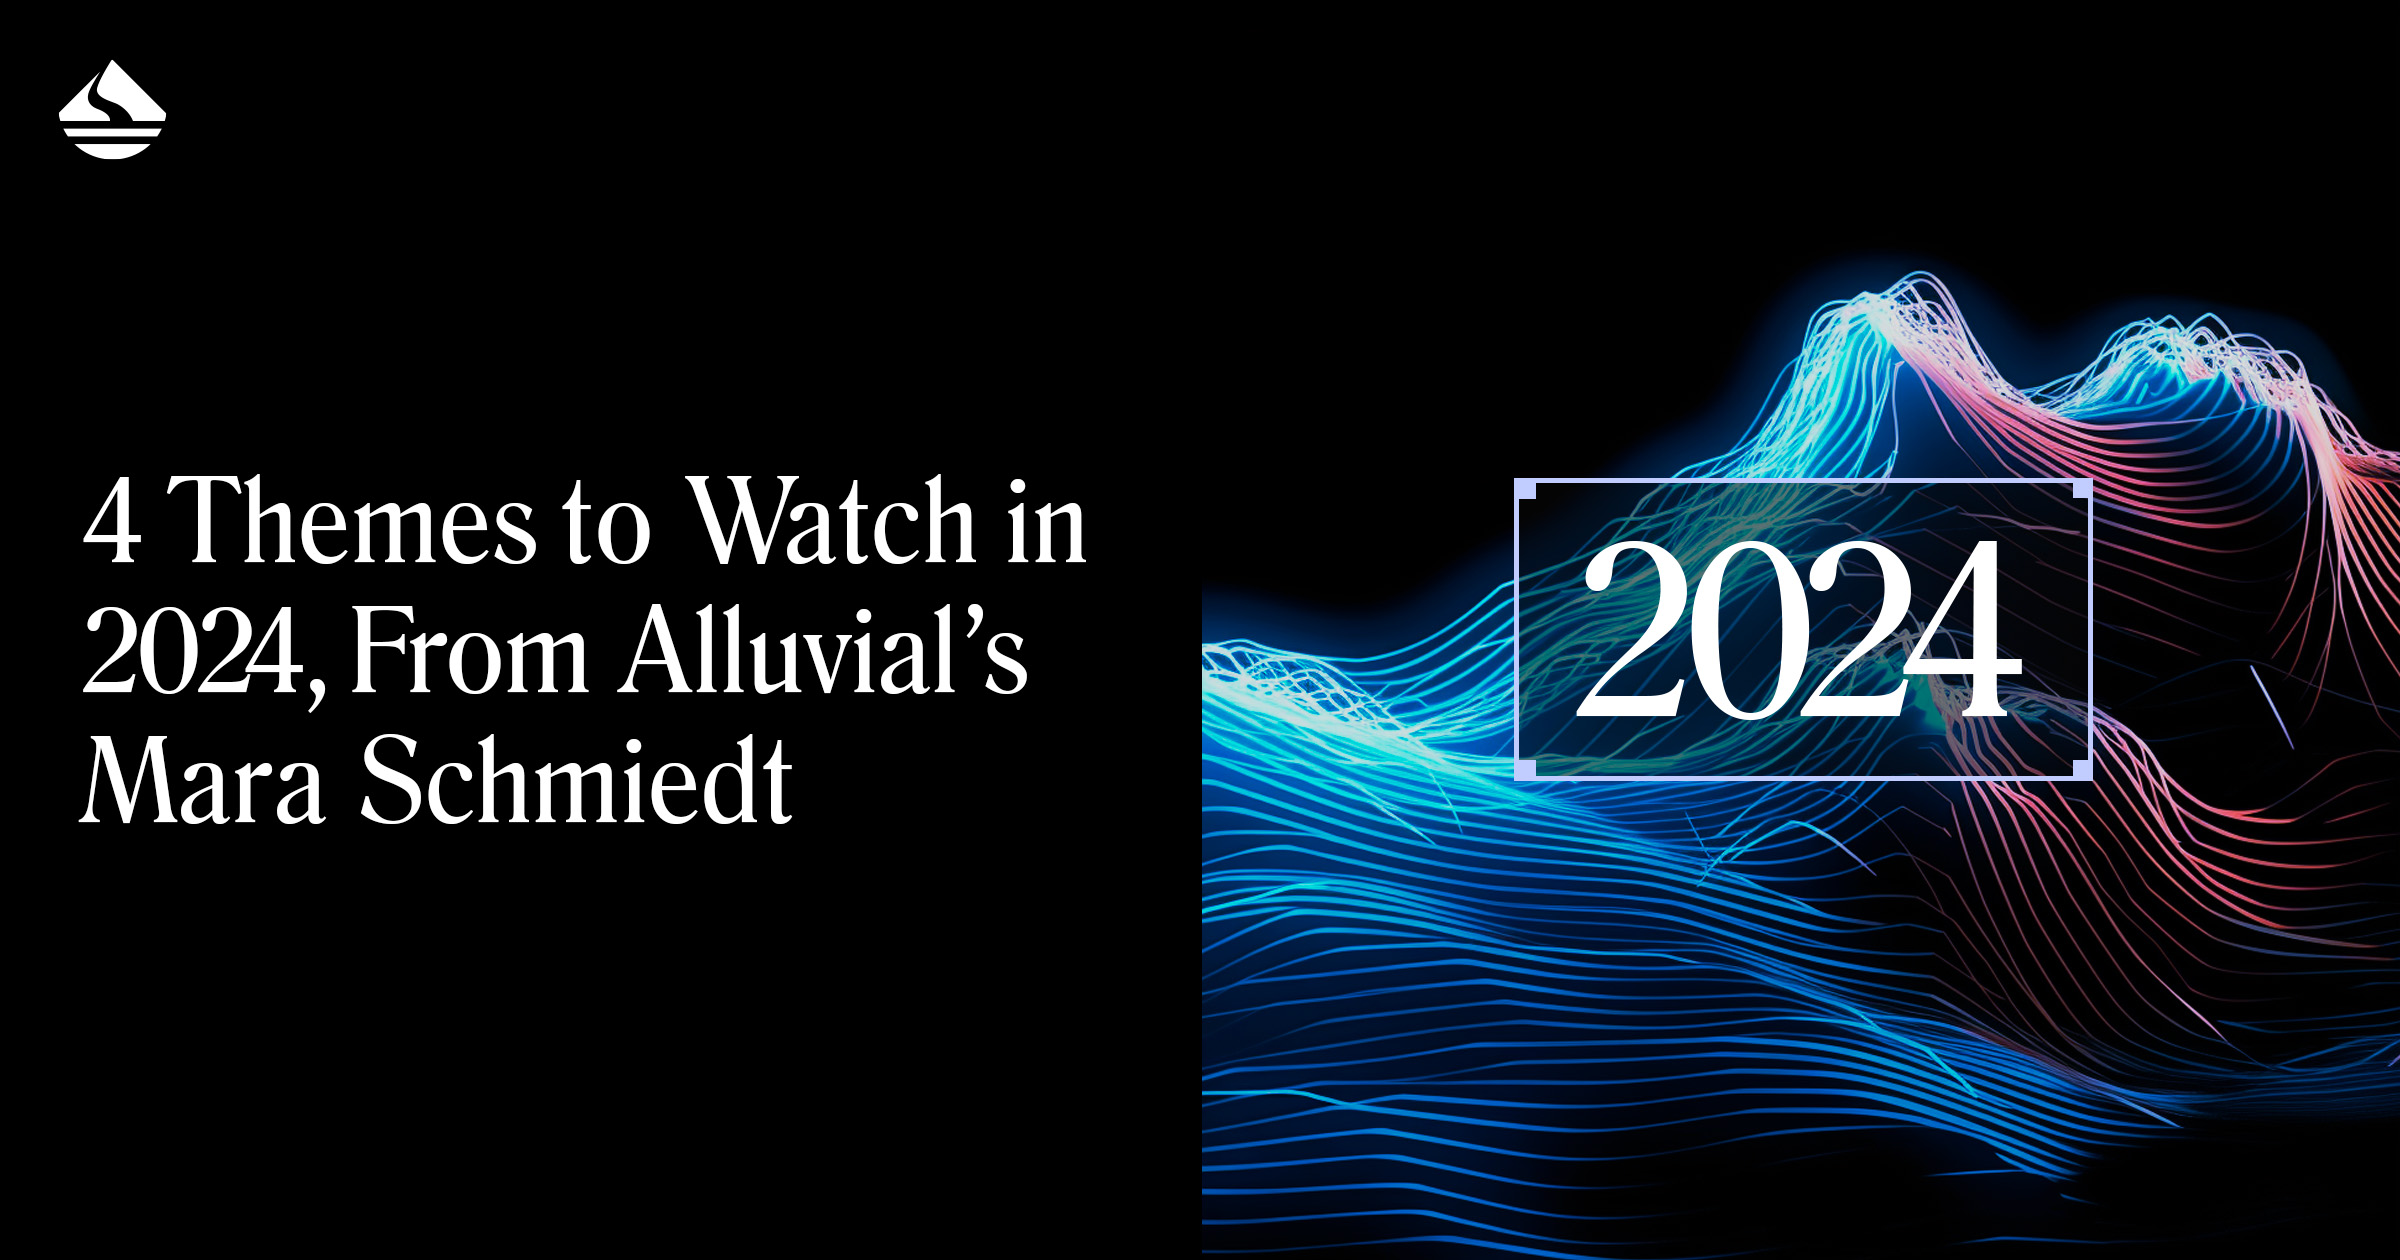 4 Themes to Watch in 2024, From Alluvial's Mara Schmiedt